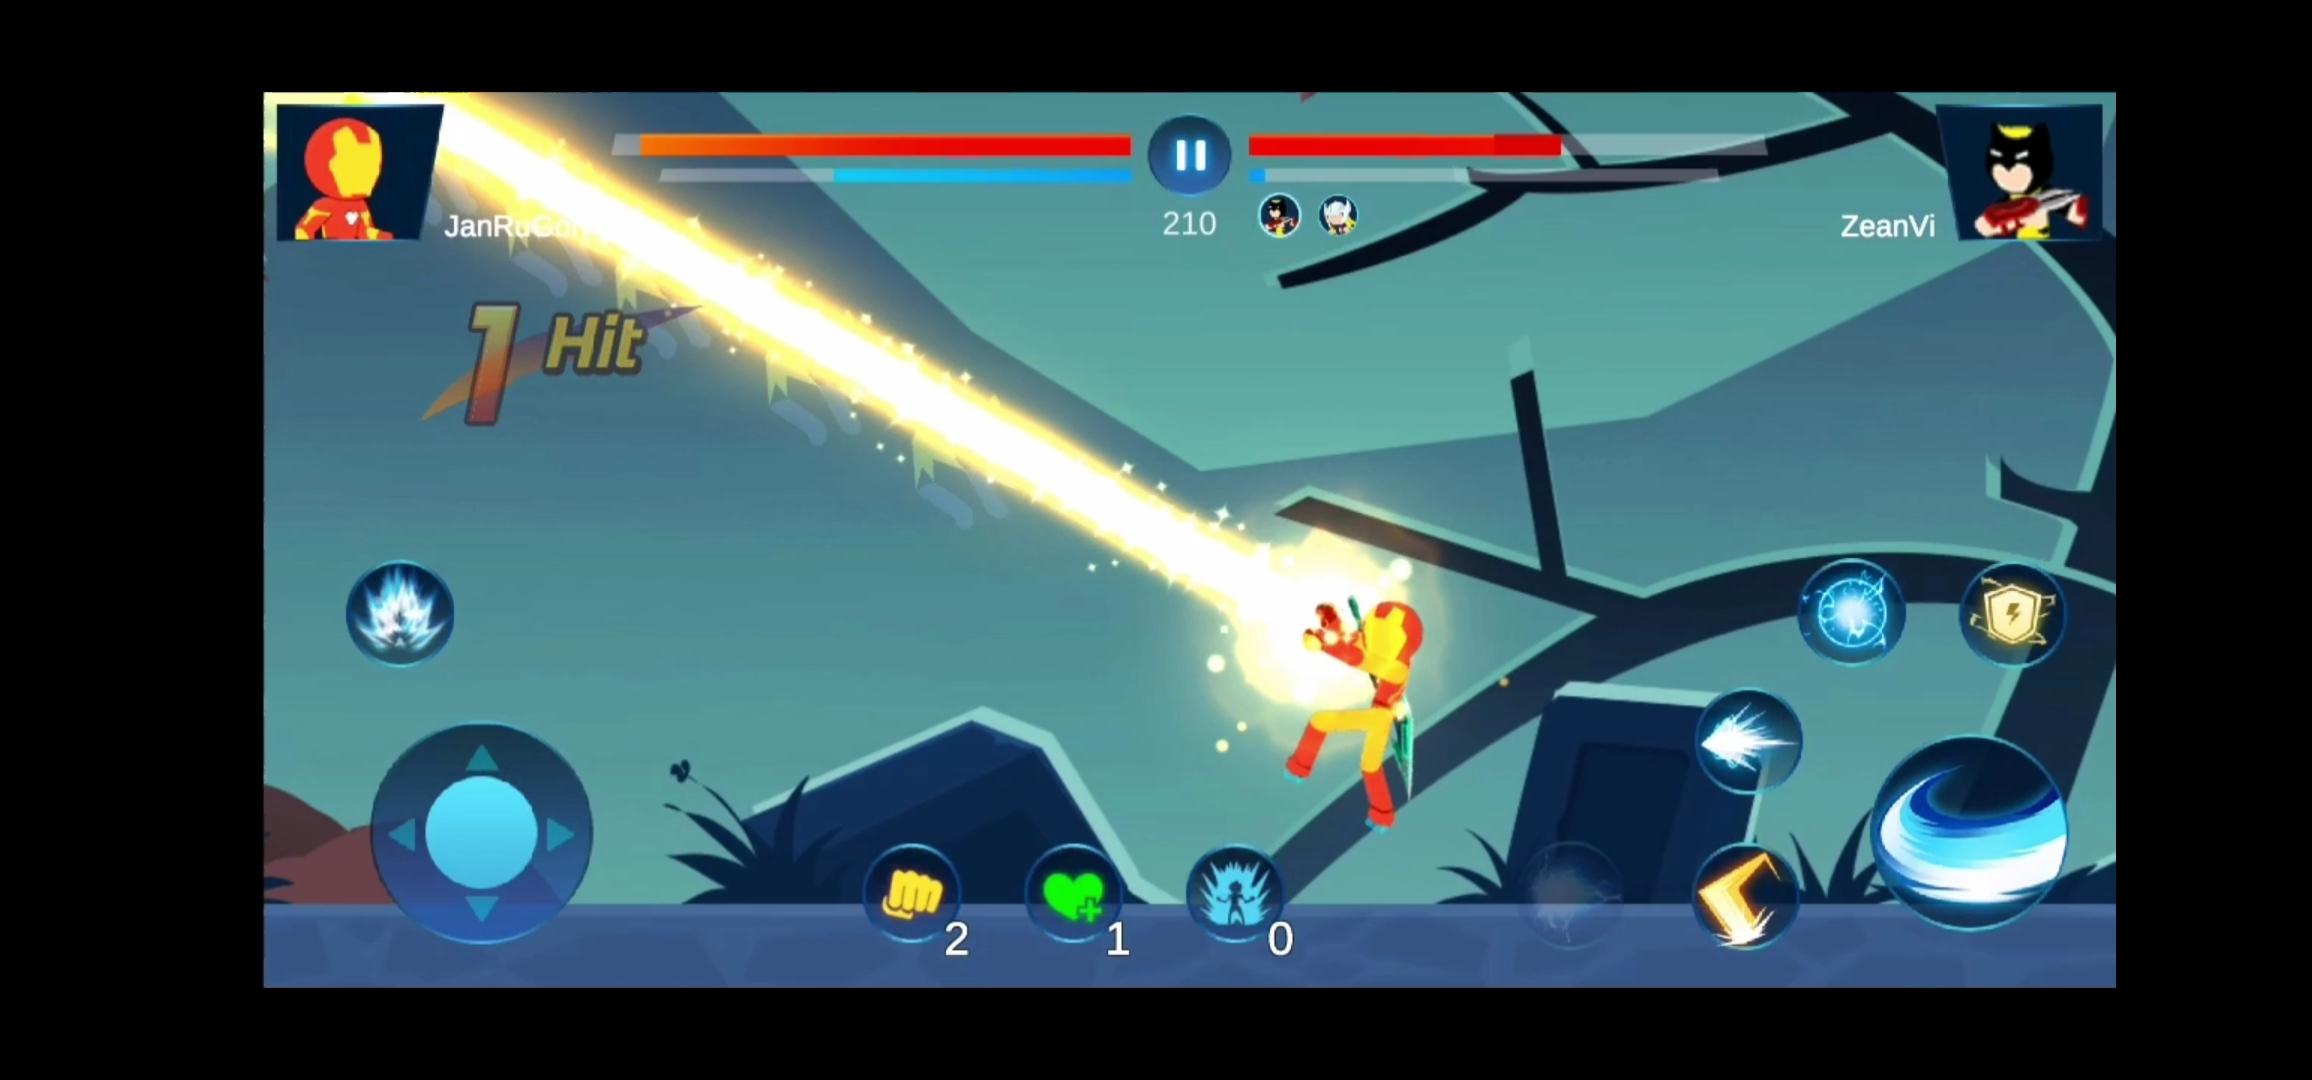 Download Stickman Fight: The Royale android on PC